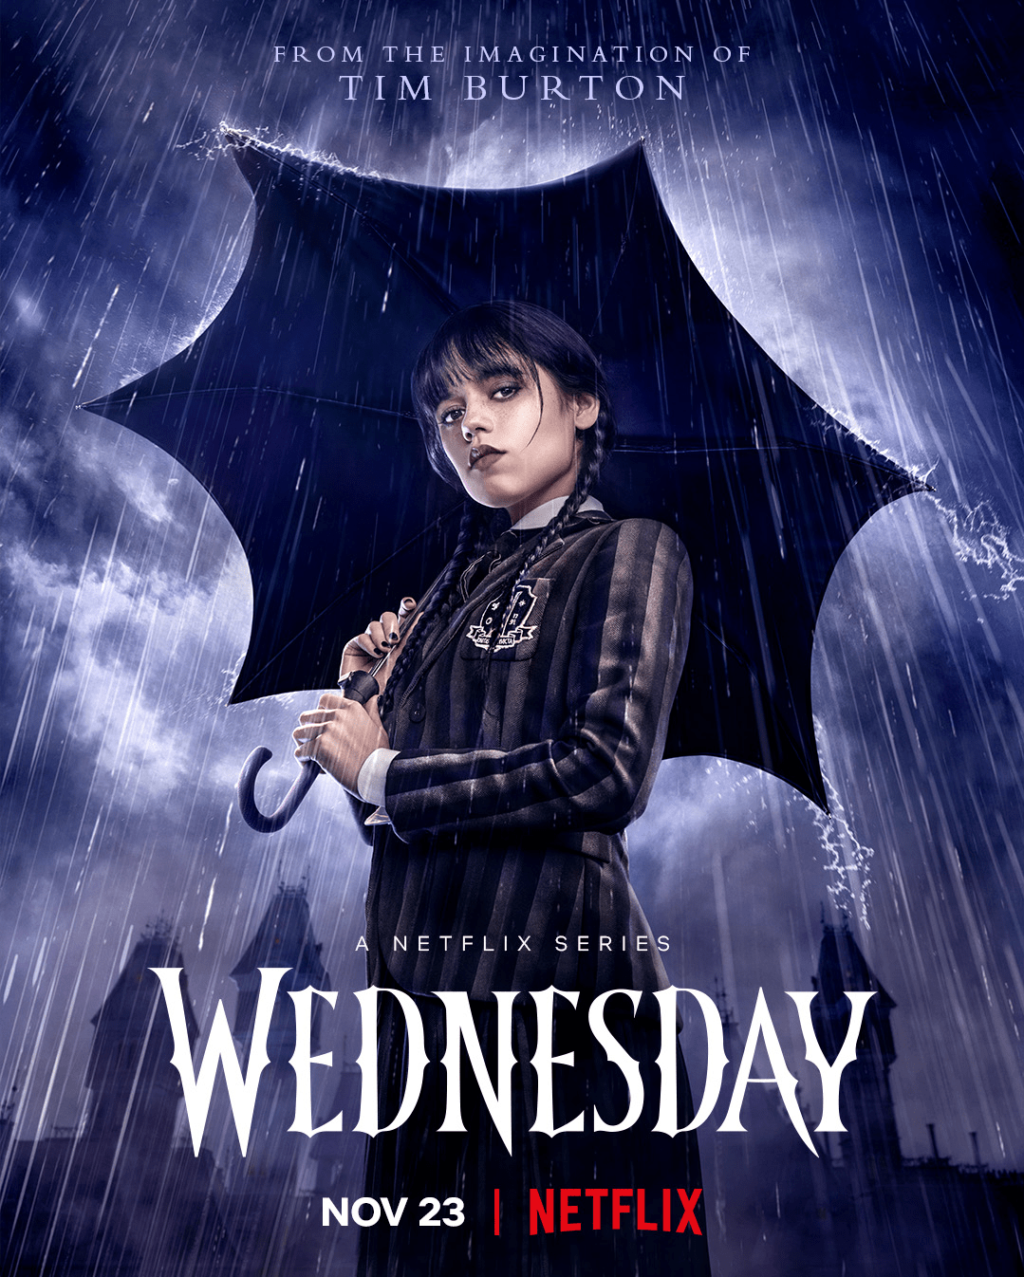 wednesday poster 1024x1277 - 'Wednesday' - Netflix Reveals Release Date And Stunning Poster For Tim Burton's Series